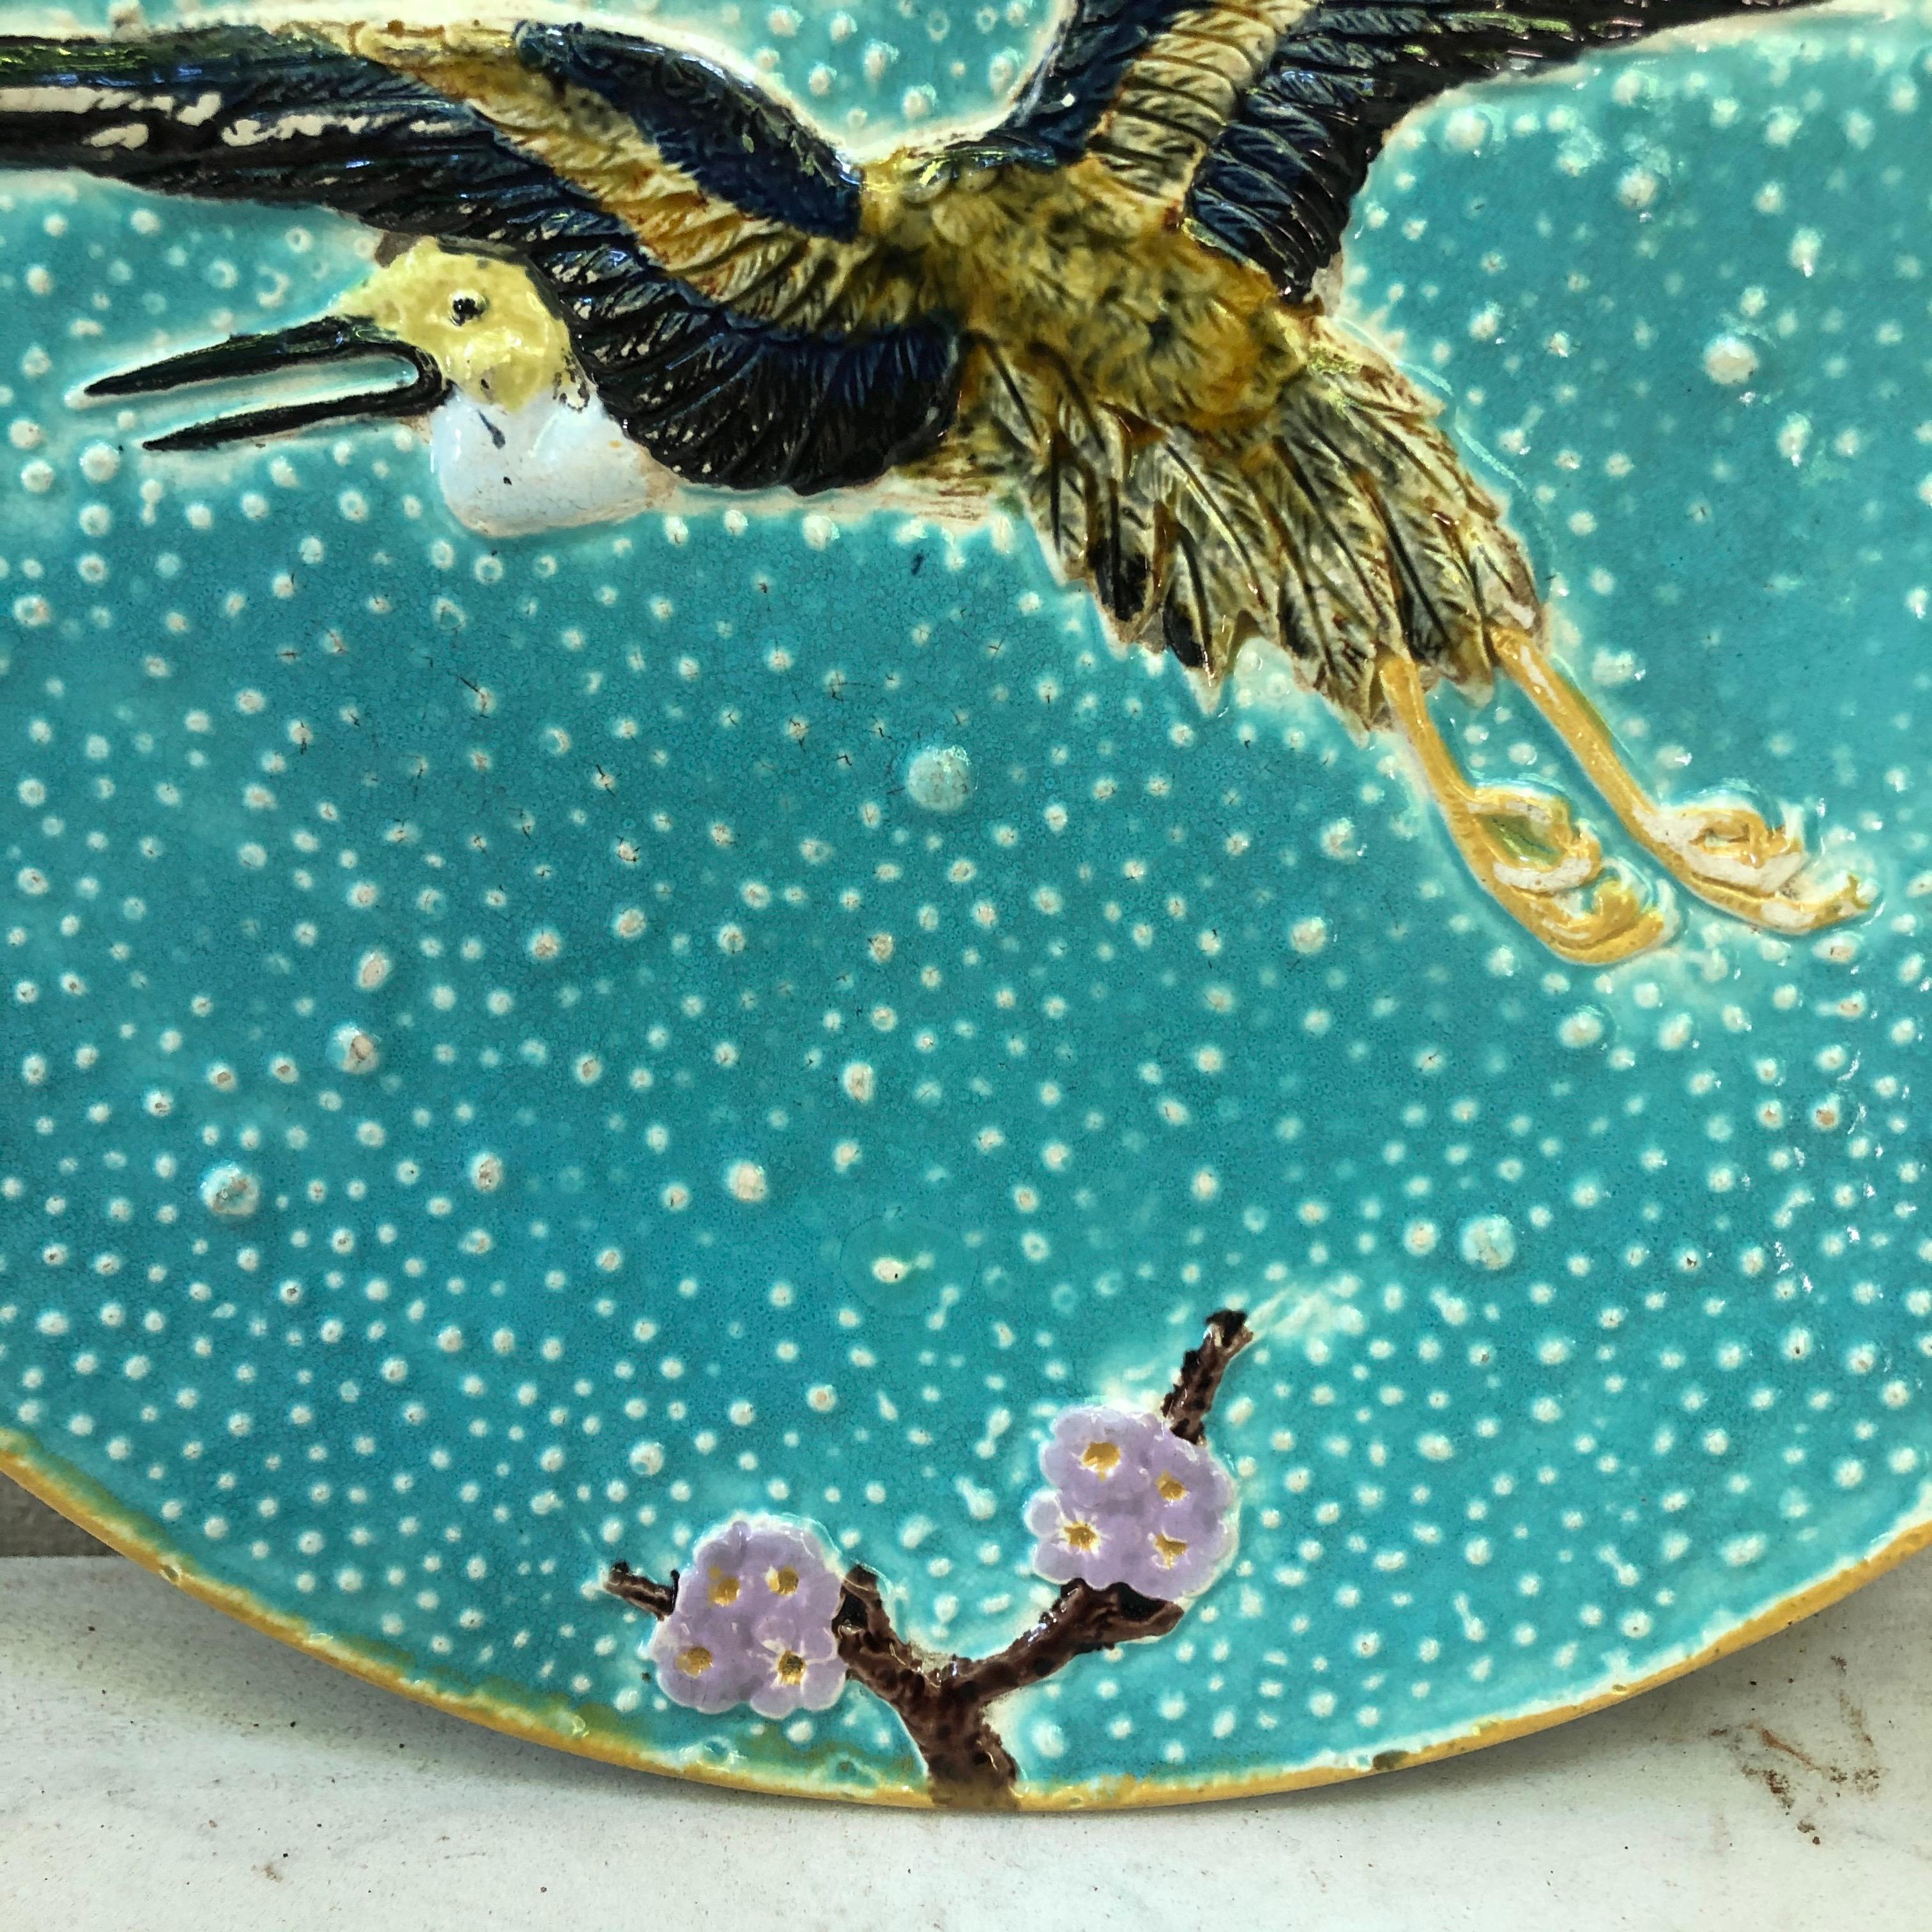 French 19th Century Majolica Plate with Crane Flying Joseph Holcroft